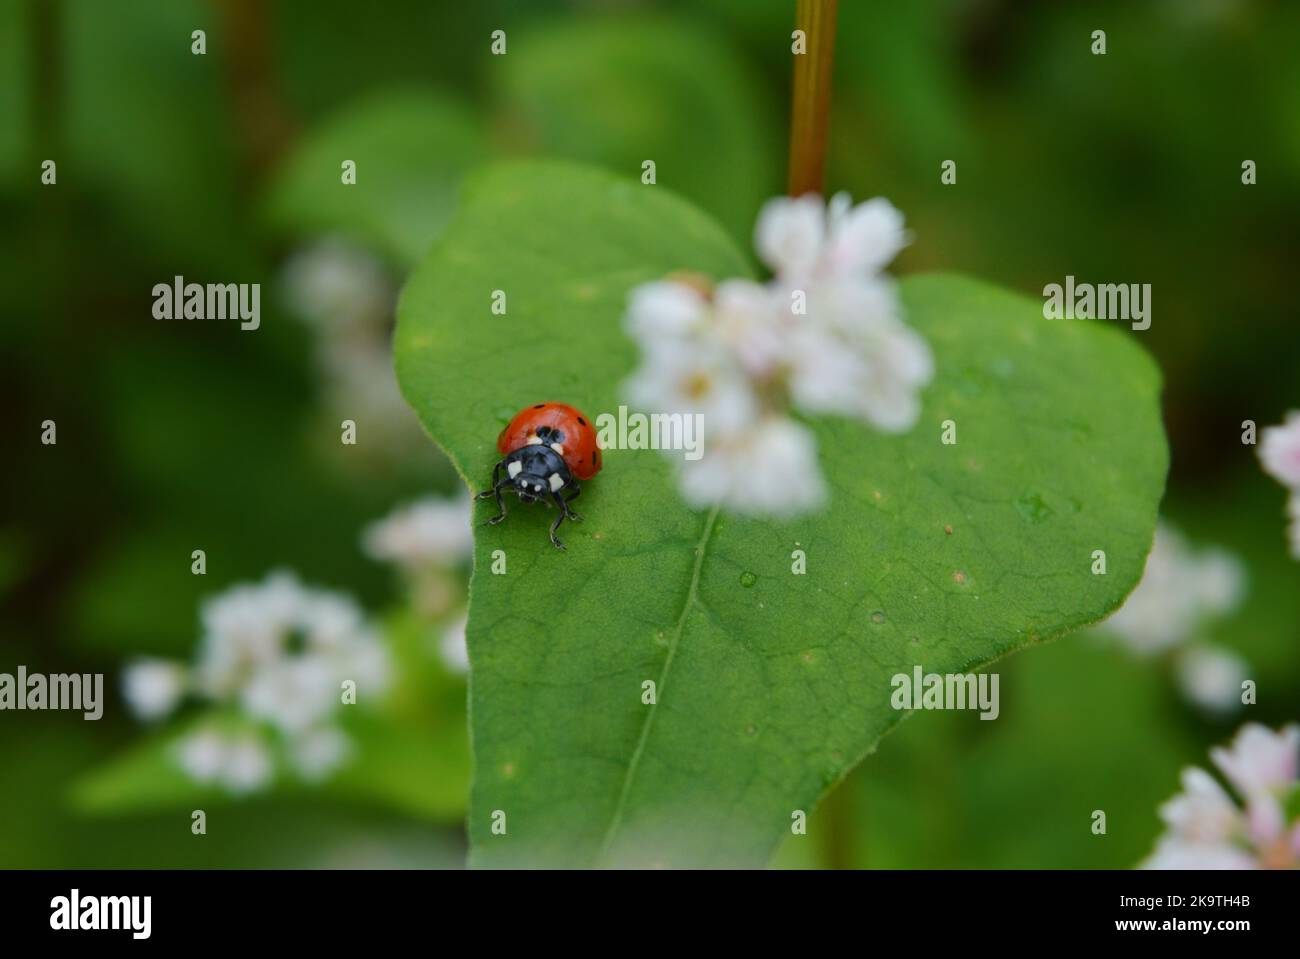 Beautiful Cutie Little Lady Bug in the middle of garden full of buckwheat flowers. Stock Photo